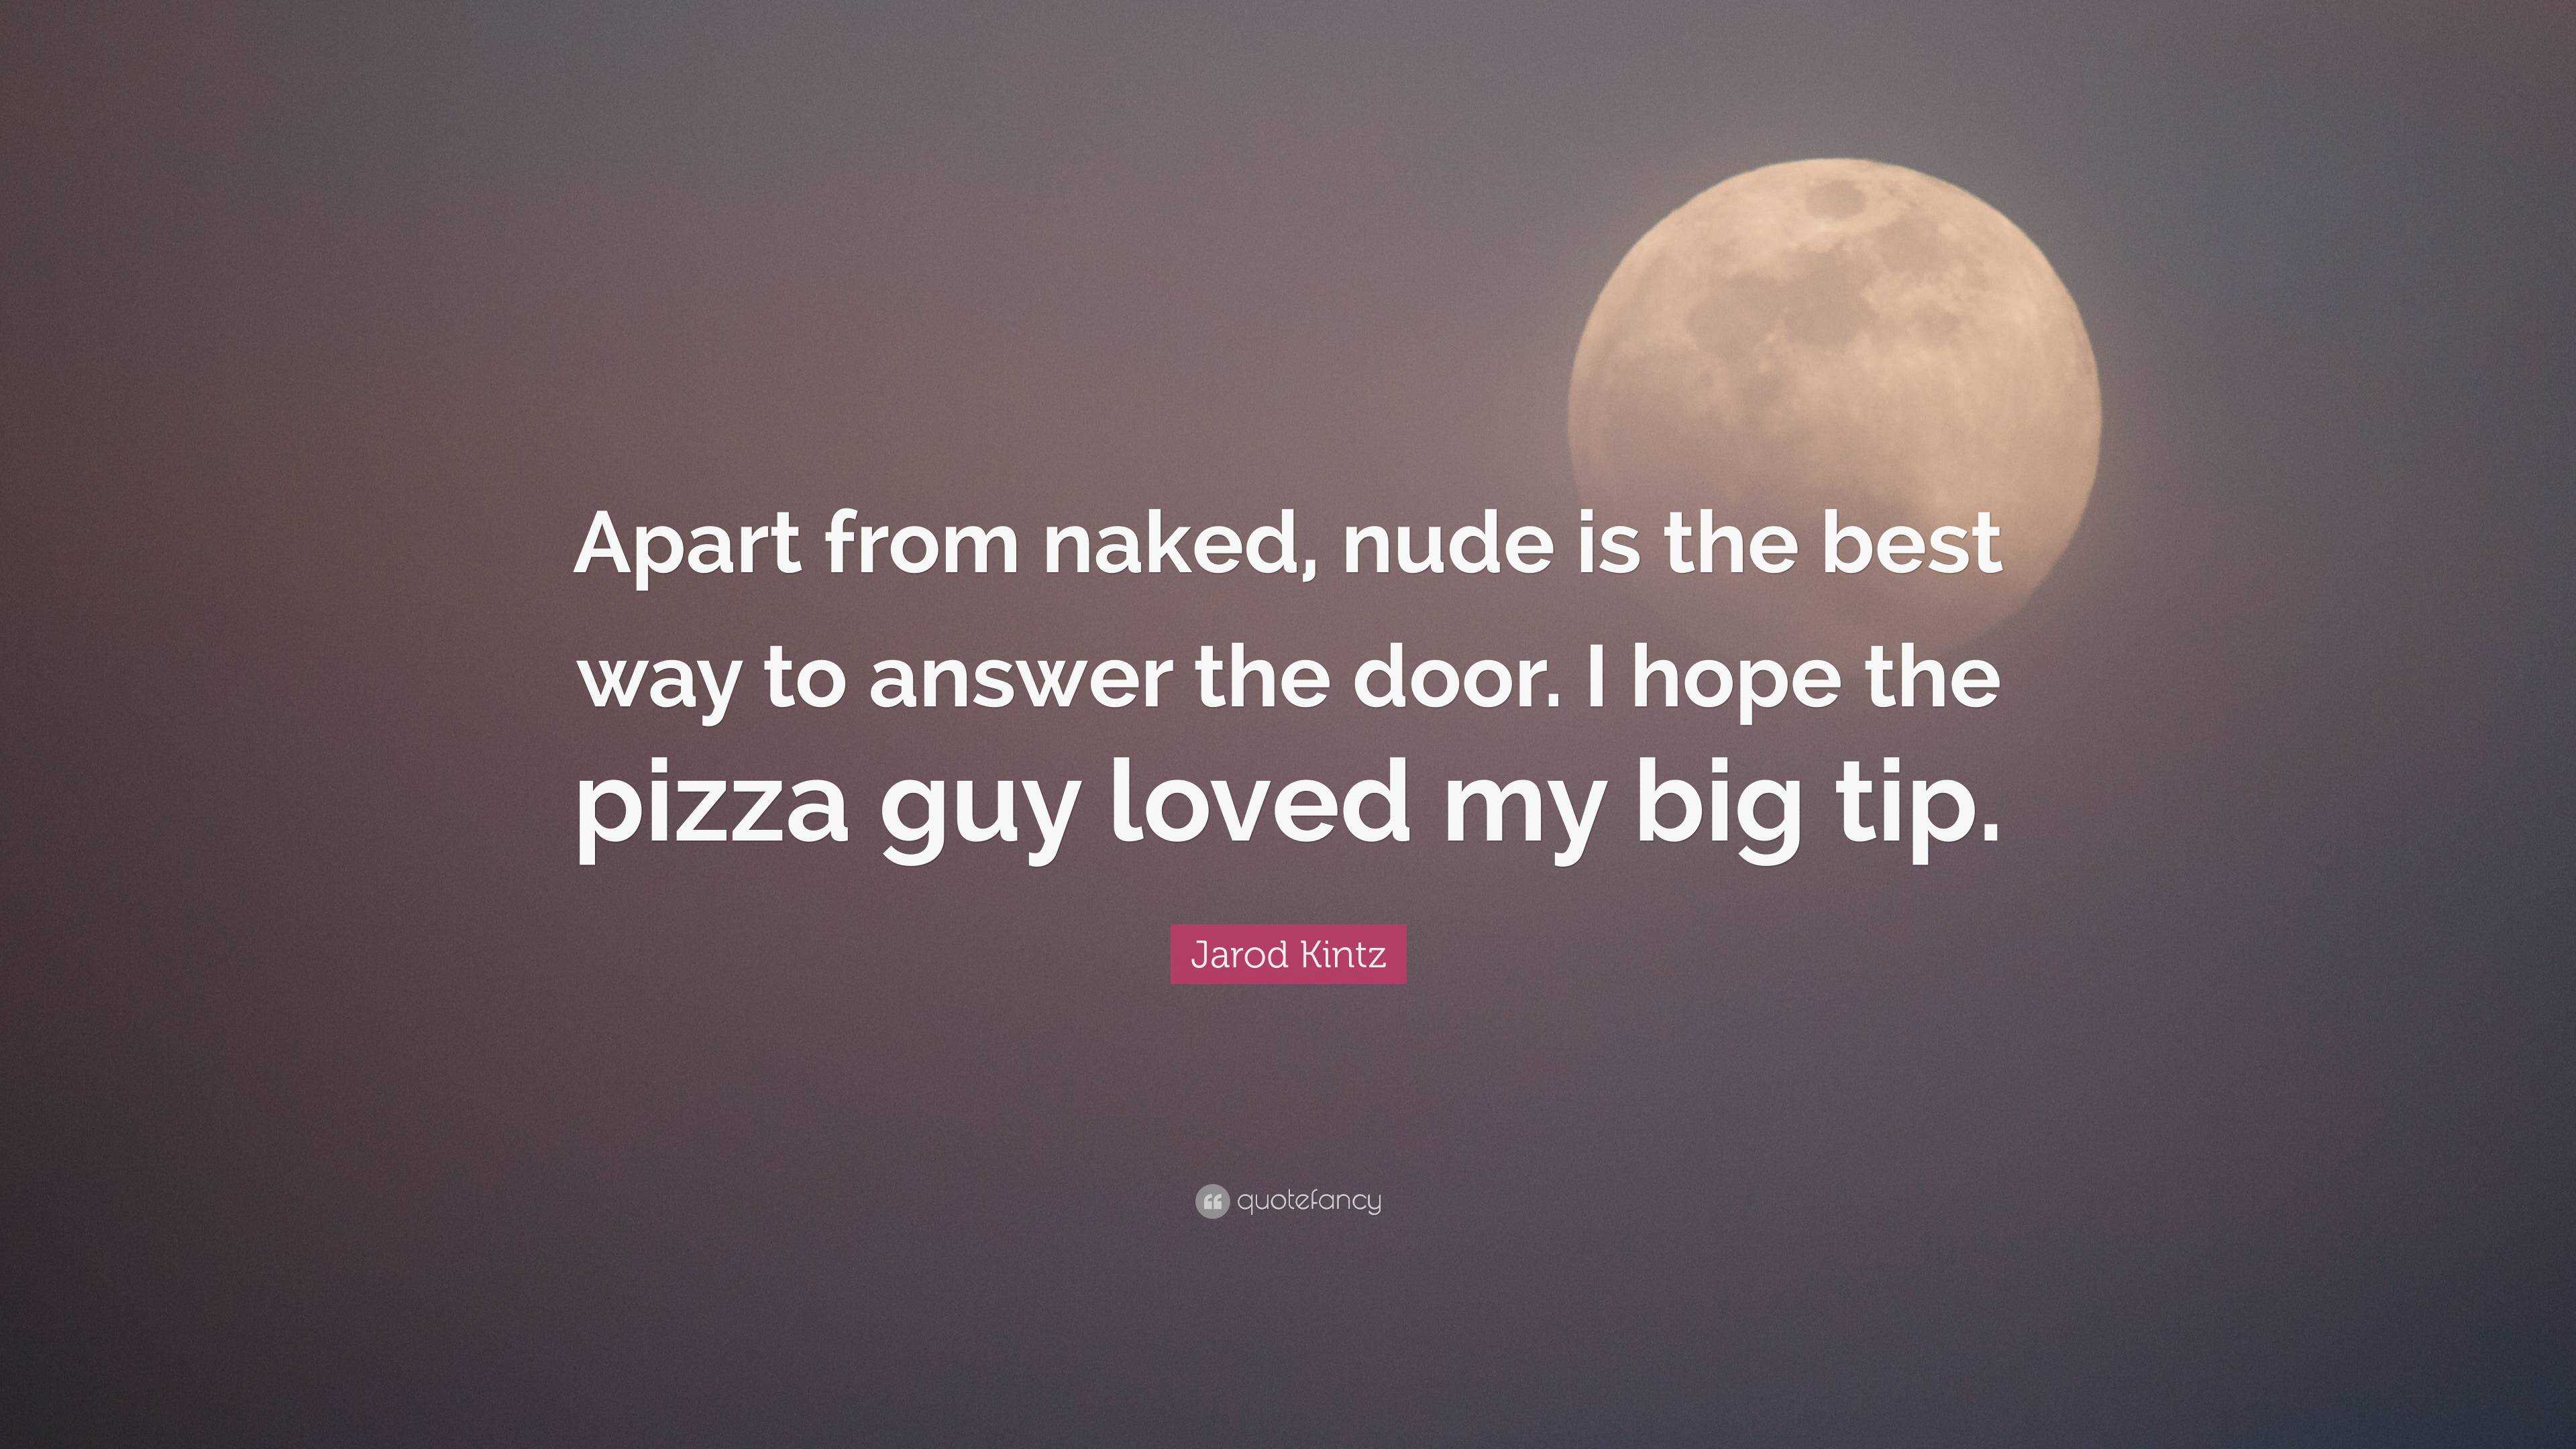 bruce mathis recommends answer the door naked pic